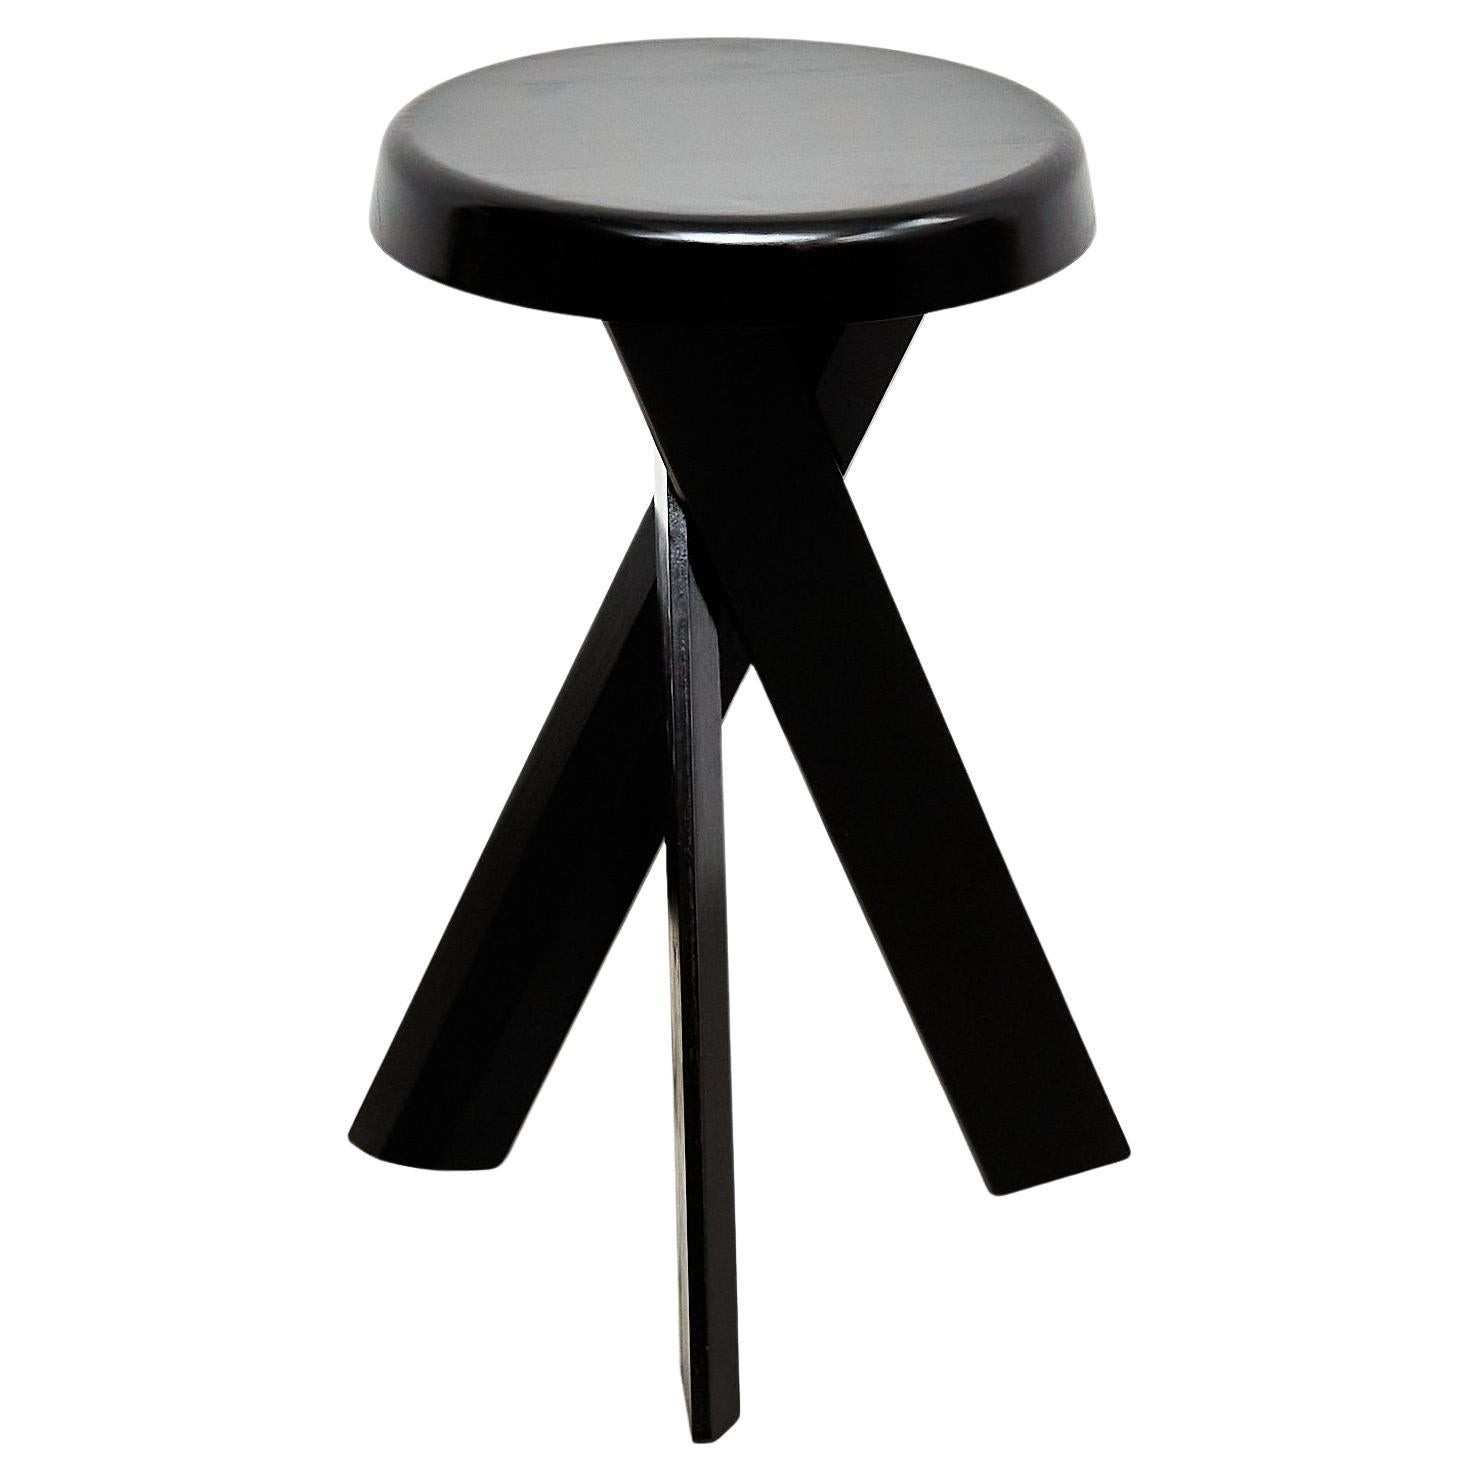 Exclusive Pierre Chapo S31b Black Edition Stool, a Timeless French Masterpiece